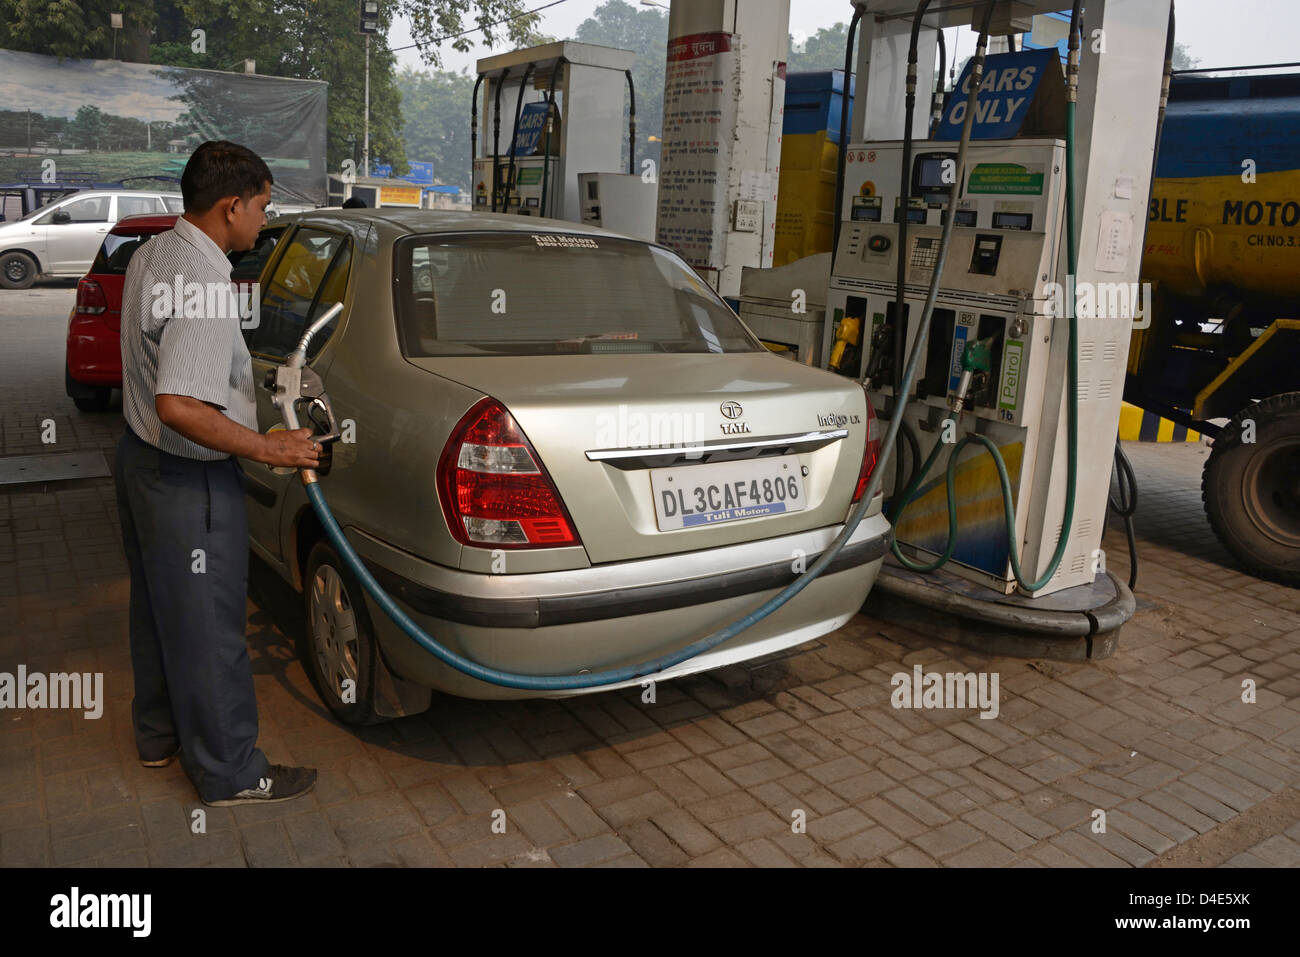 A garage fuel attendant filling up with fuel at a Bharat petrol station in Old Delhi, India. Stock Photo